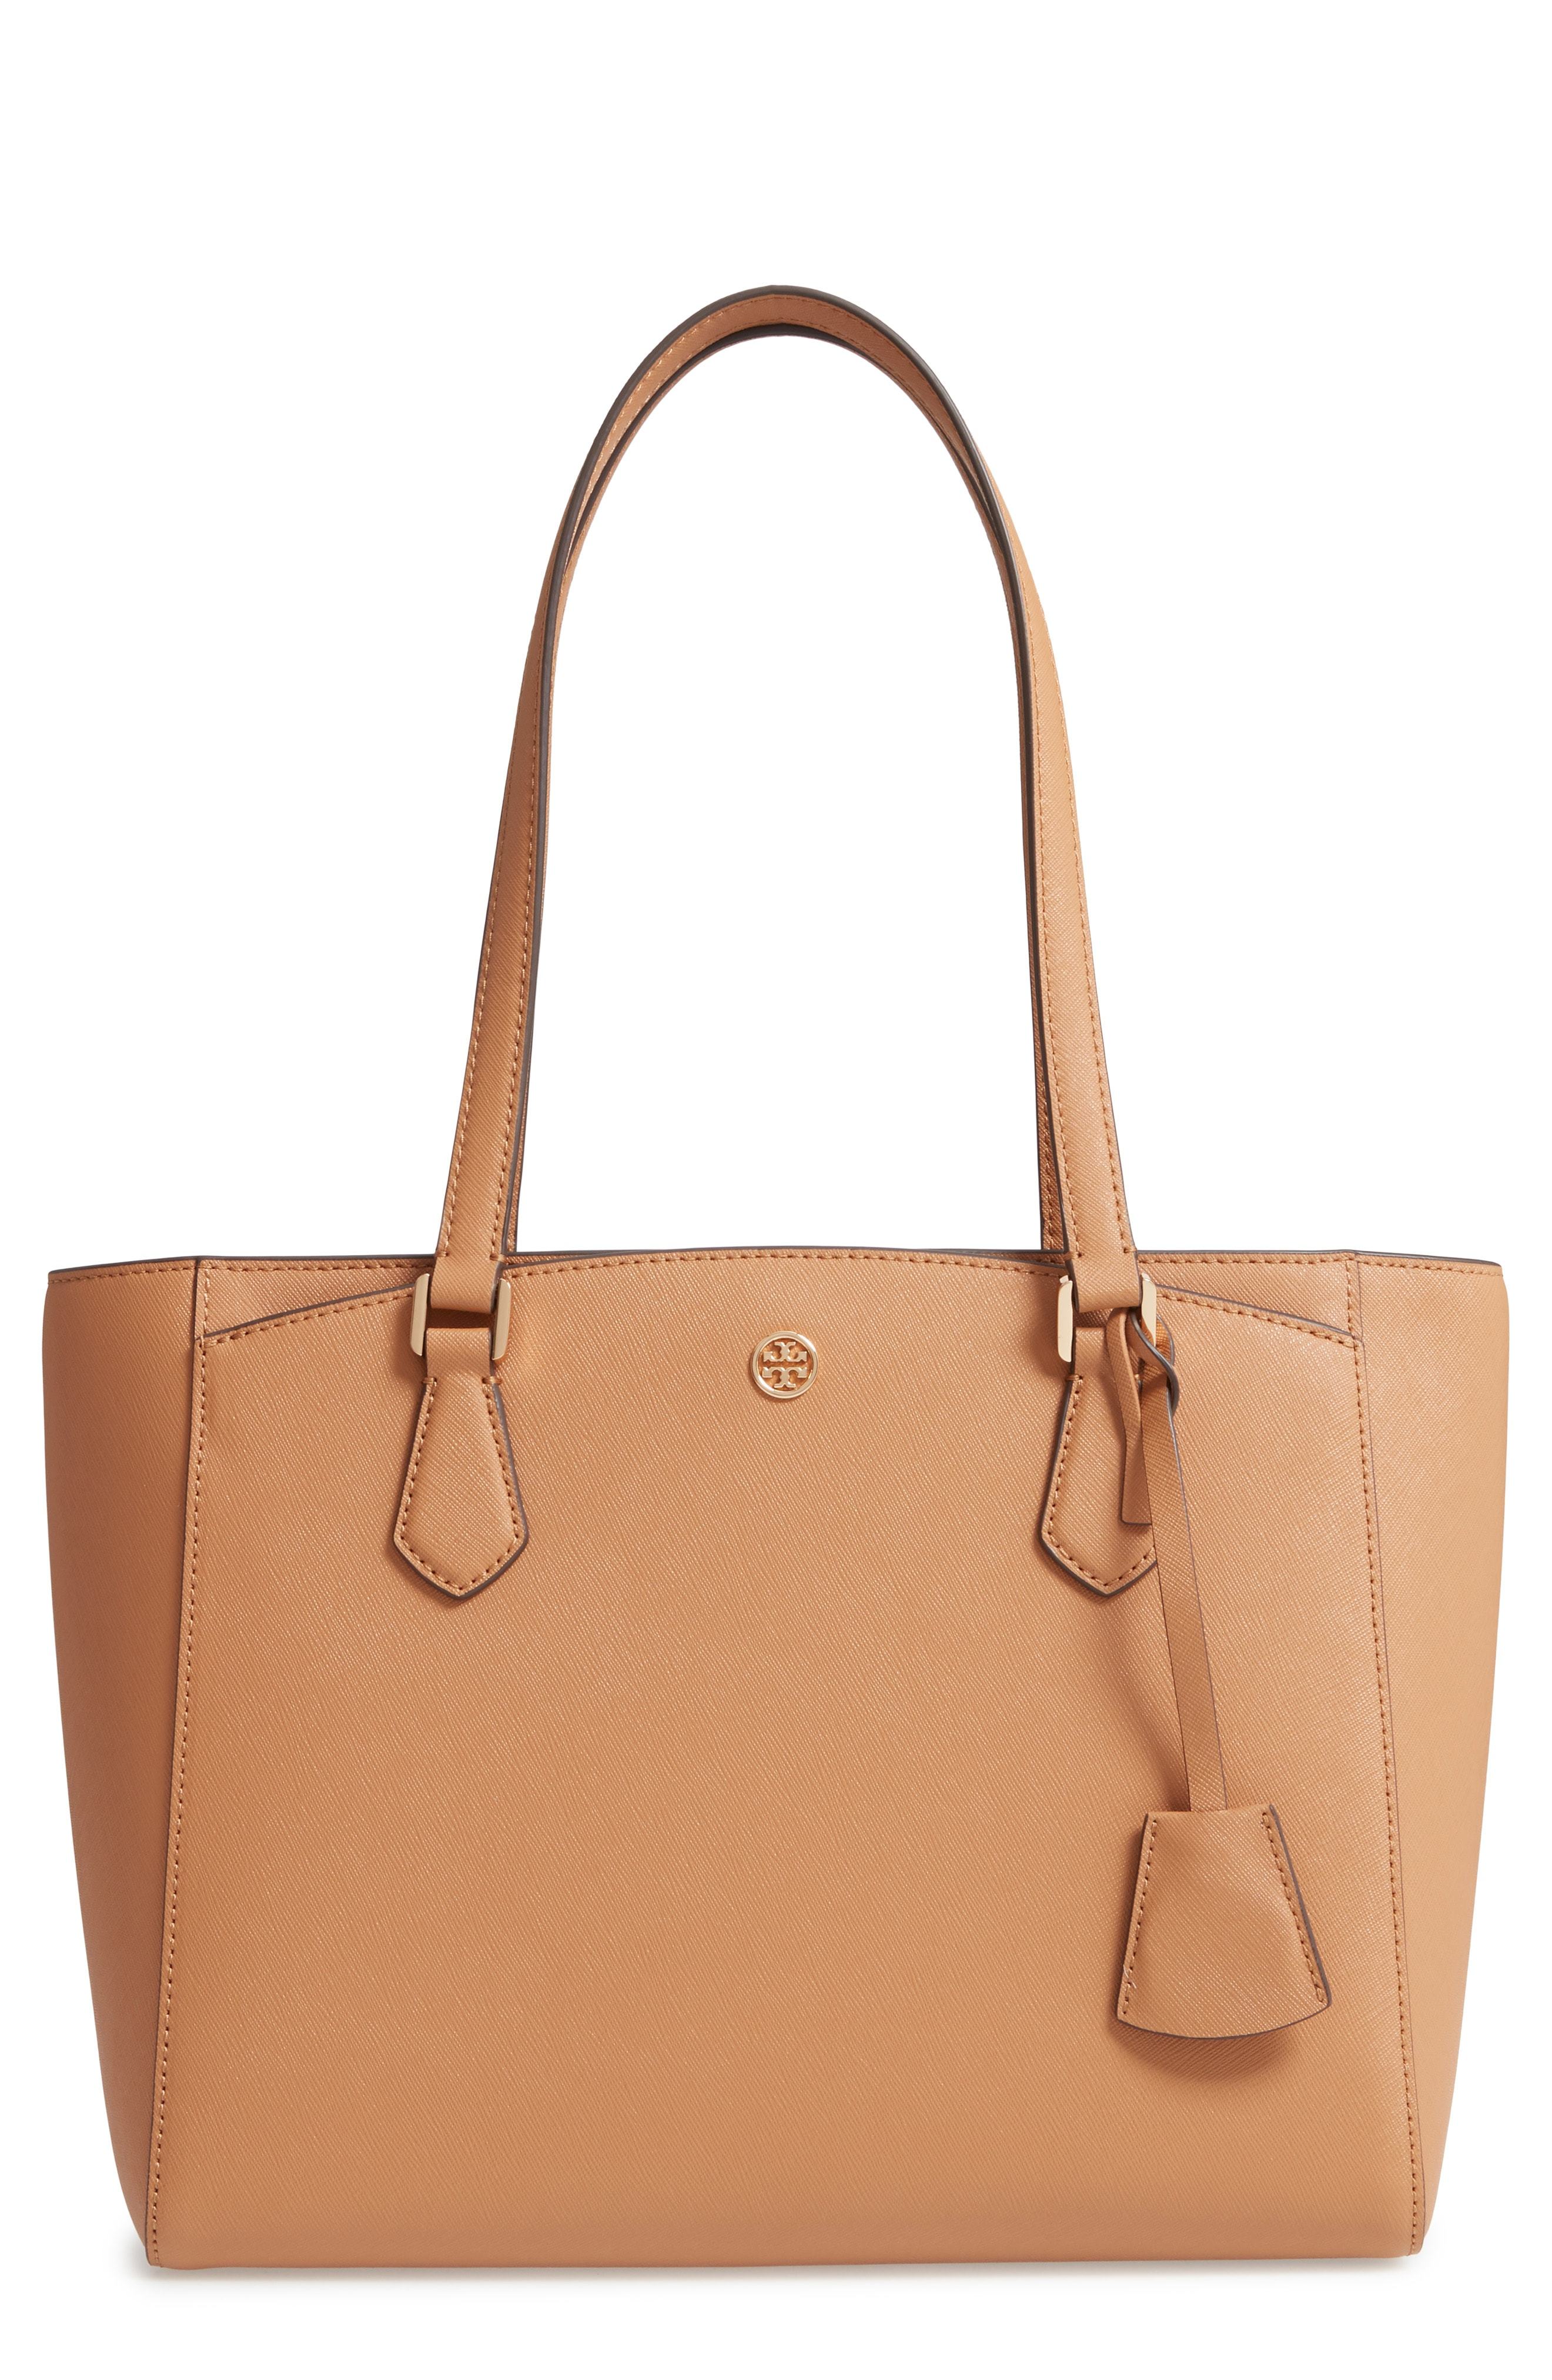 Tory Burch tan saffiano leather tote- EUC - $155 - From Aimee